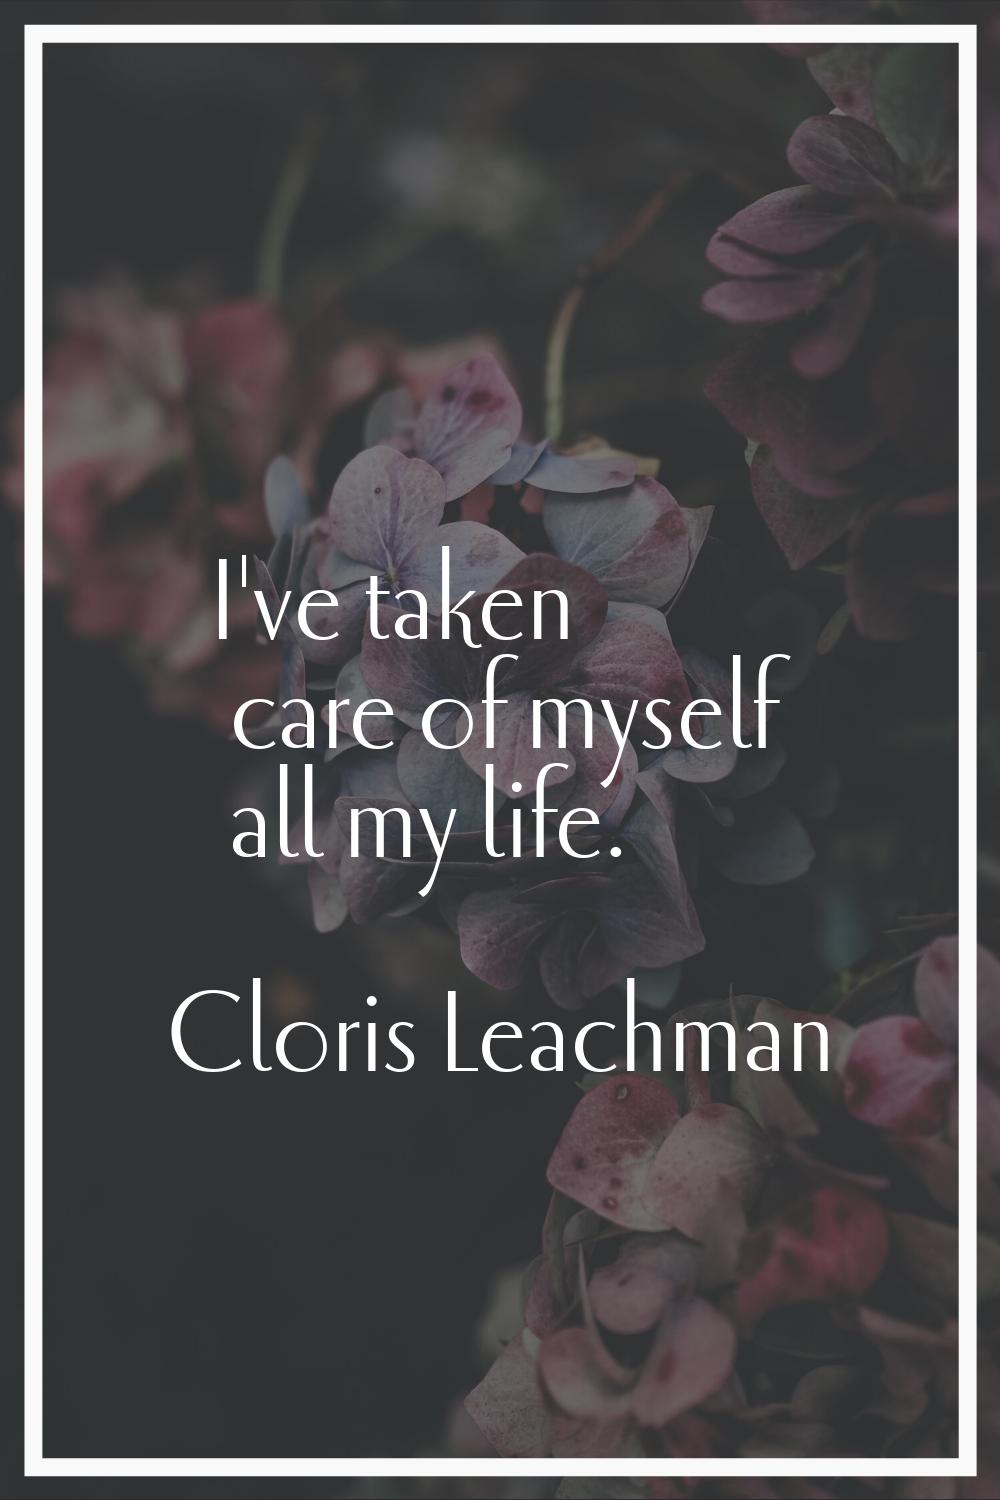 I've taken care of myself all my life.